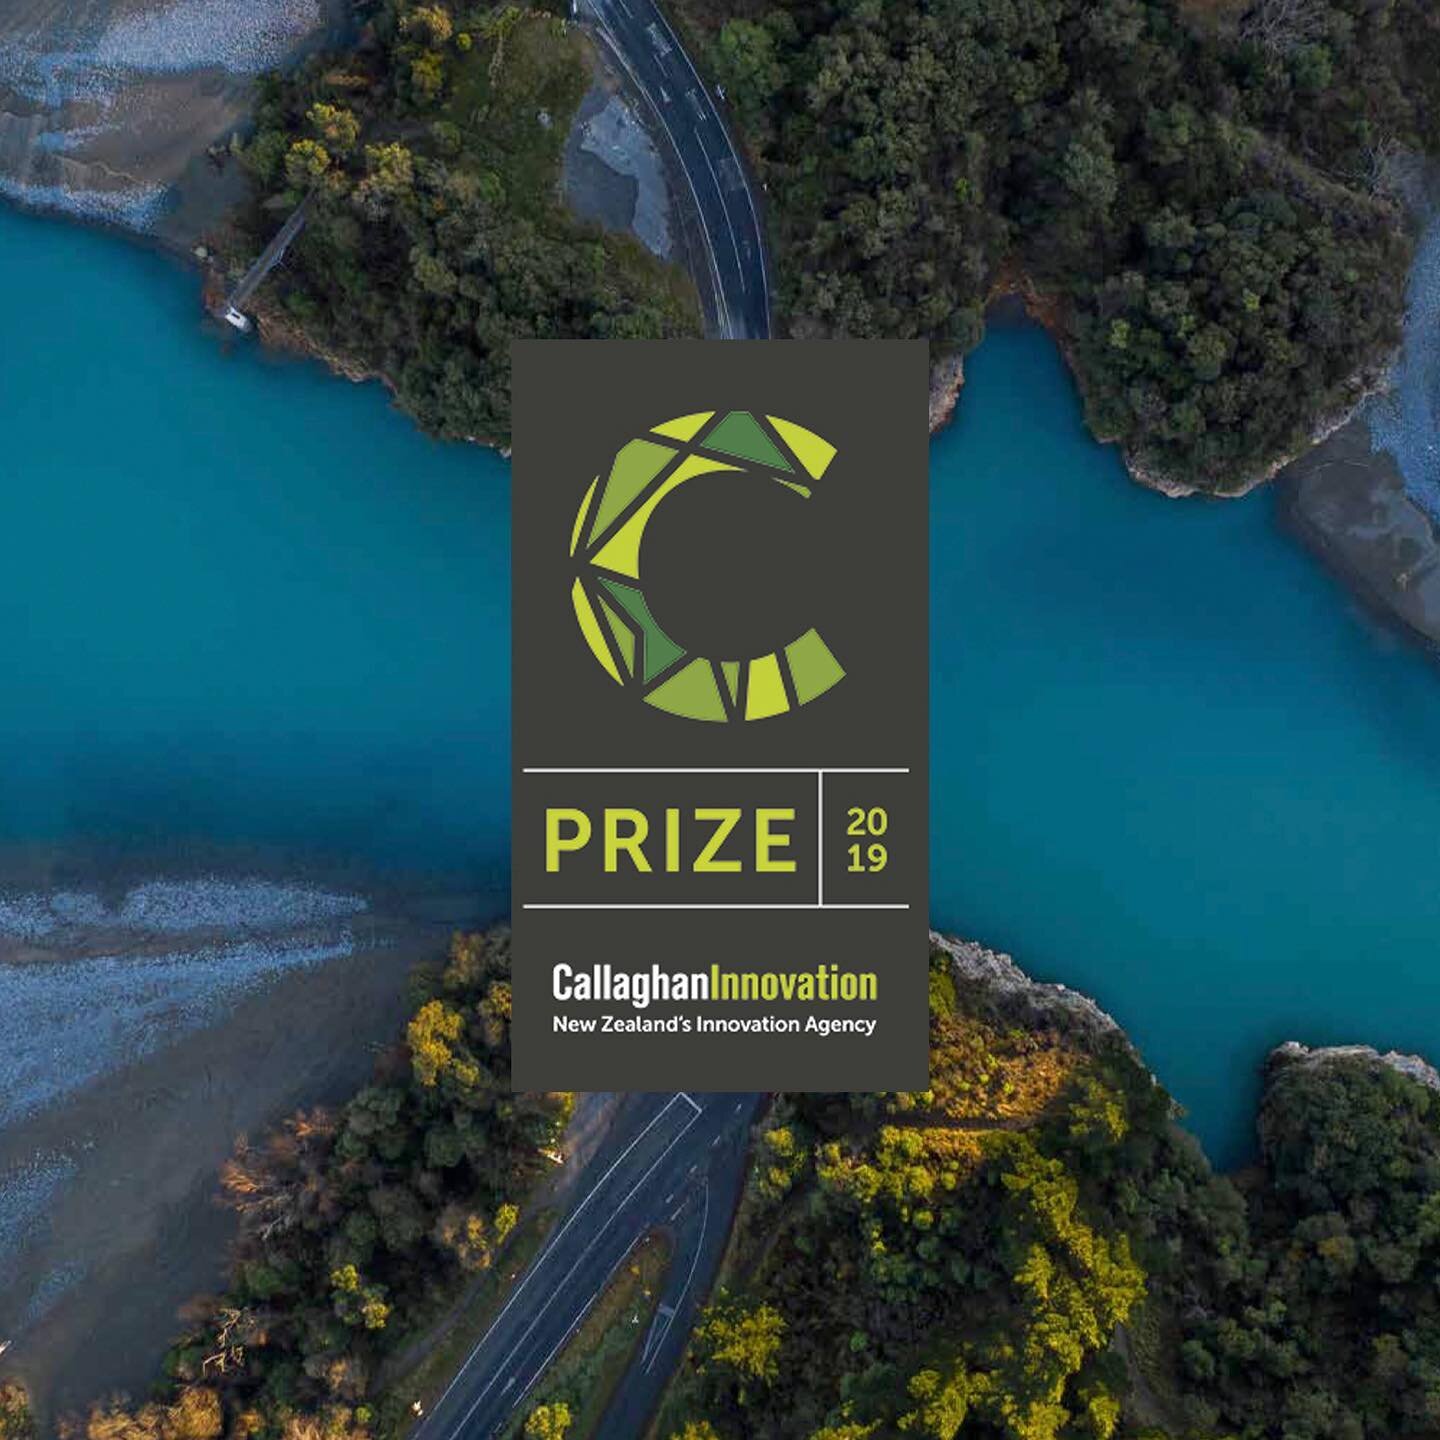 It's been a pleasure to be involved with Callaghan Innovation toolsmithing the 2019 C-Prize. This year C-Prize is looking for teams with world-leading innovative solutions to environmental problems. The aim is to activate and accelerate positive tran